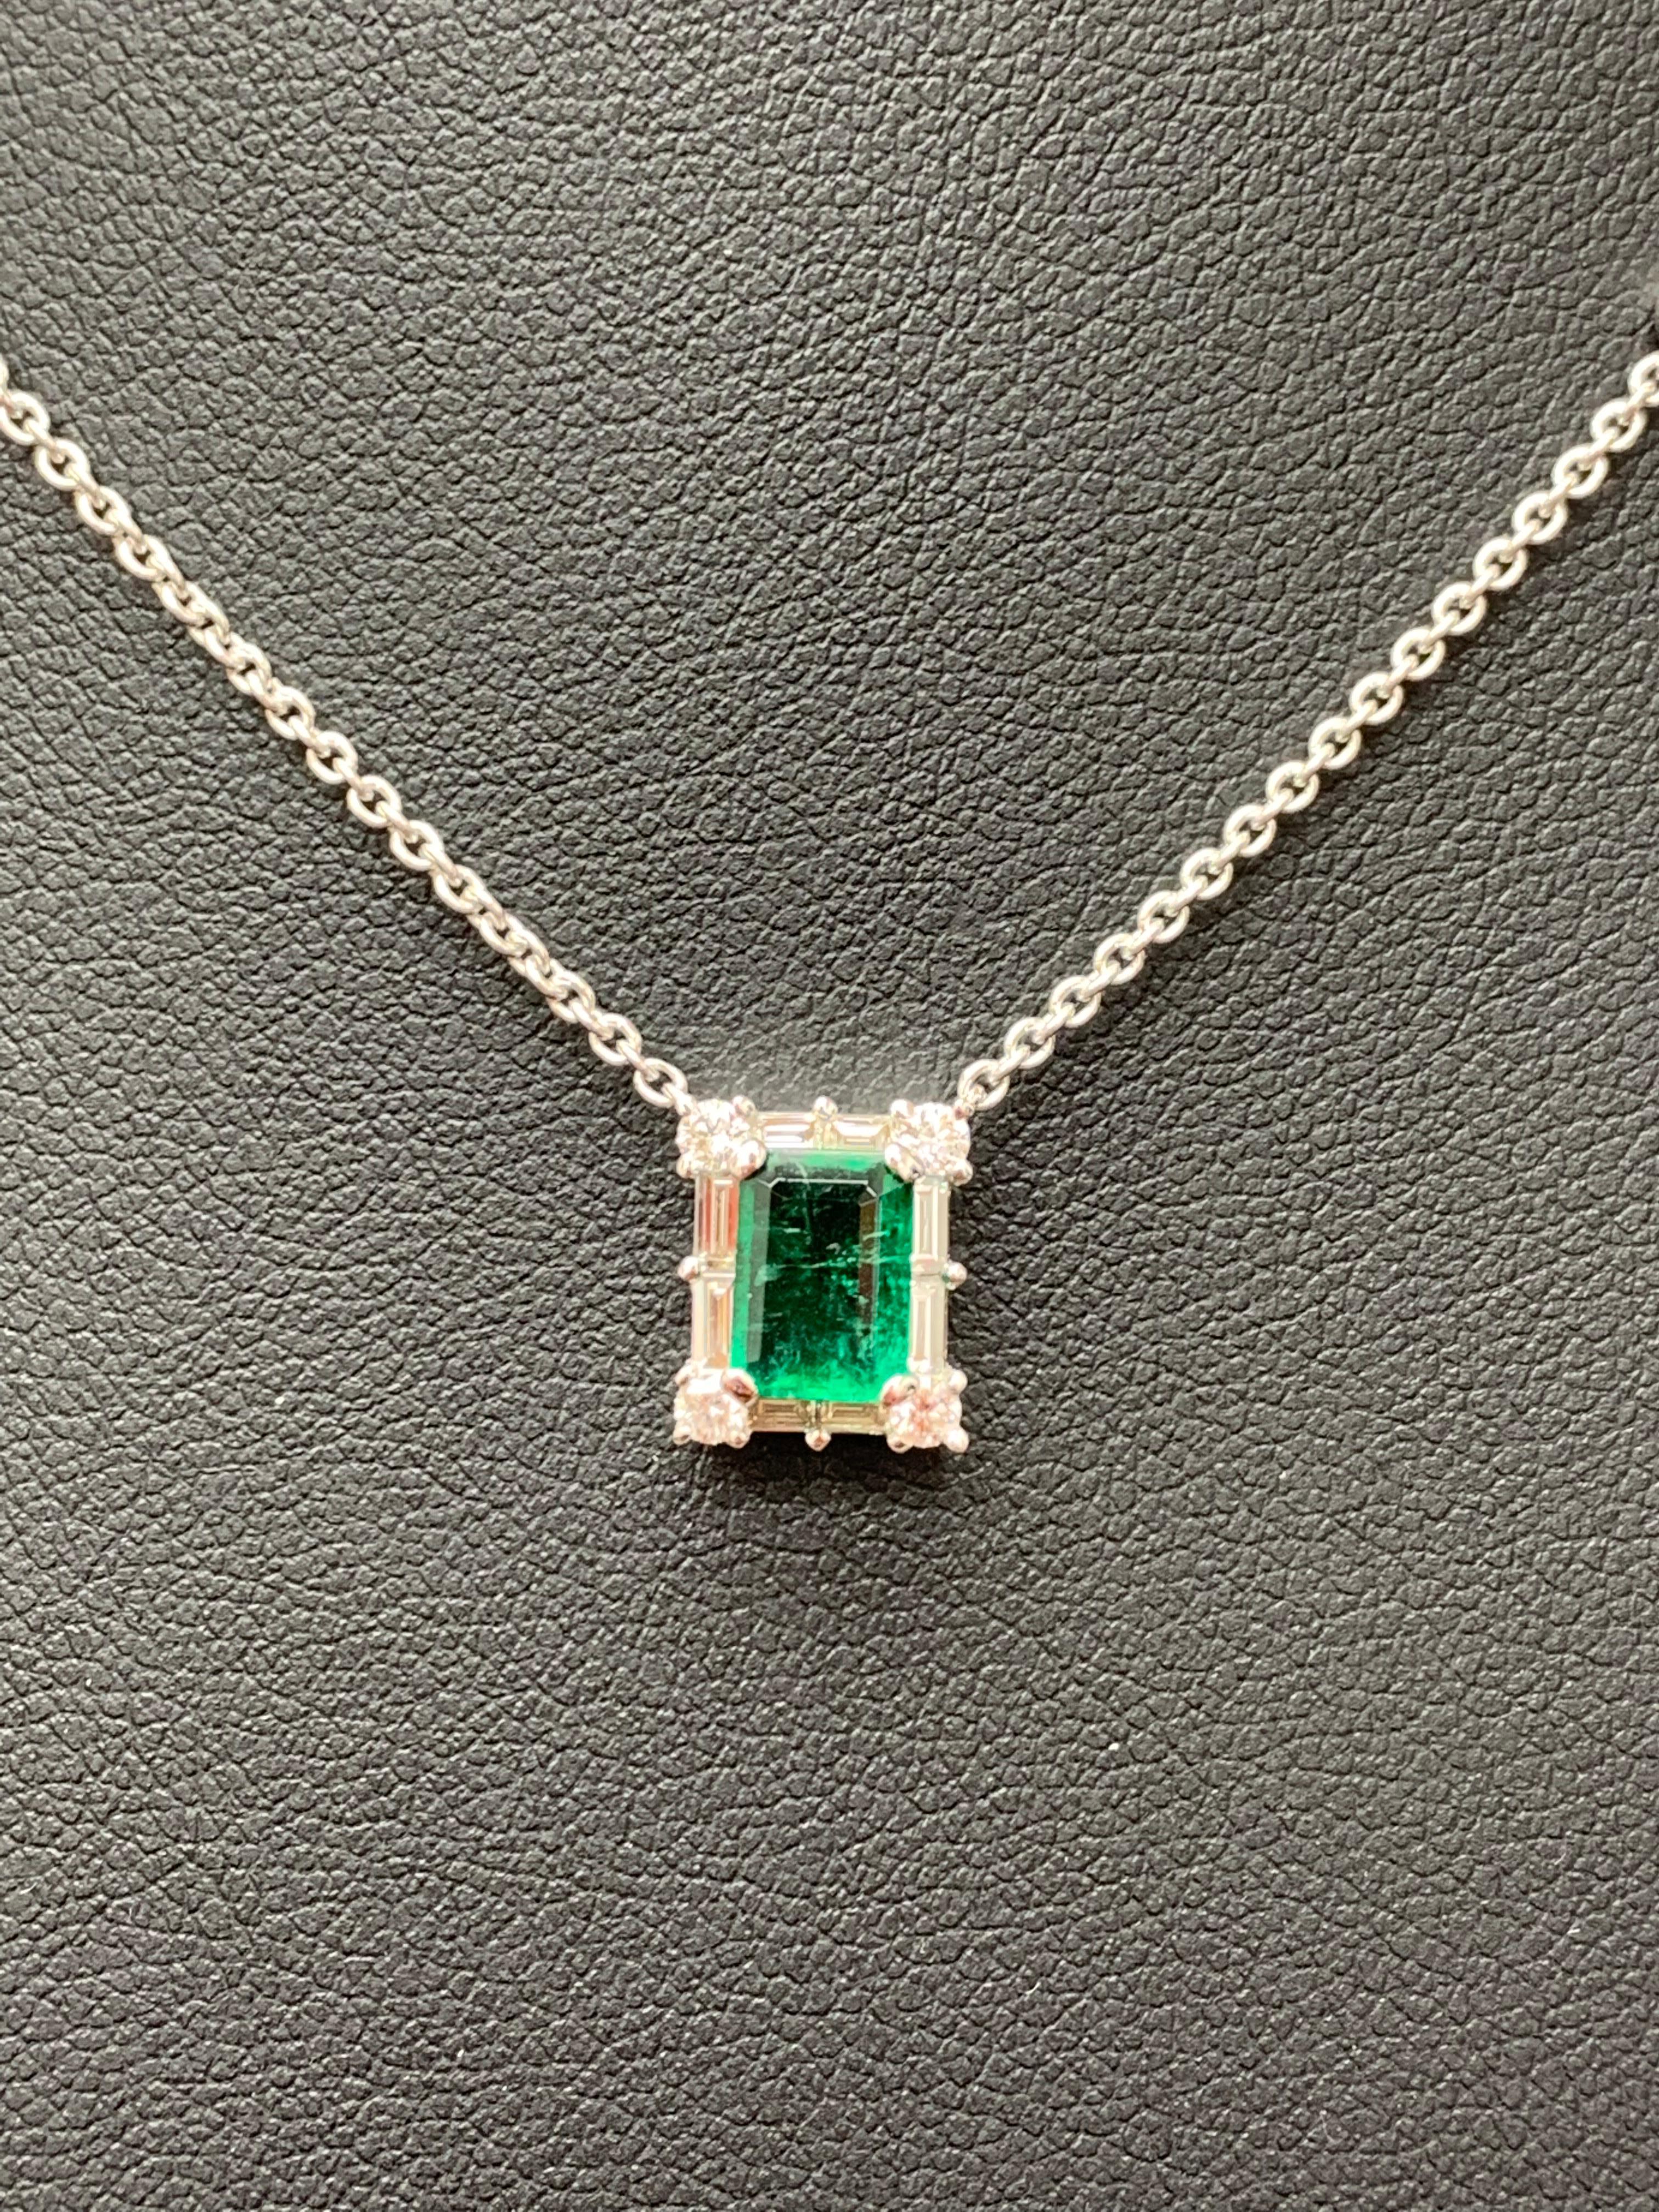 Modern 0.99 Carat Emerald Cut Emerald and Diamond Pendant Necklace in 18K White Gold For Sale